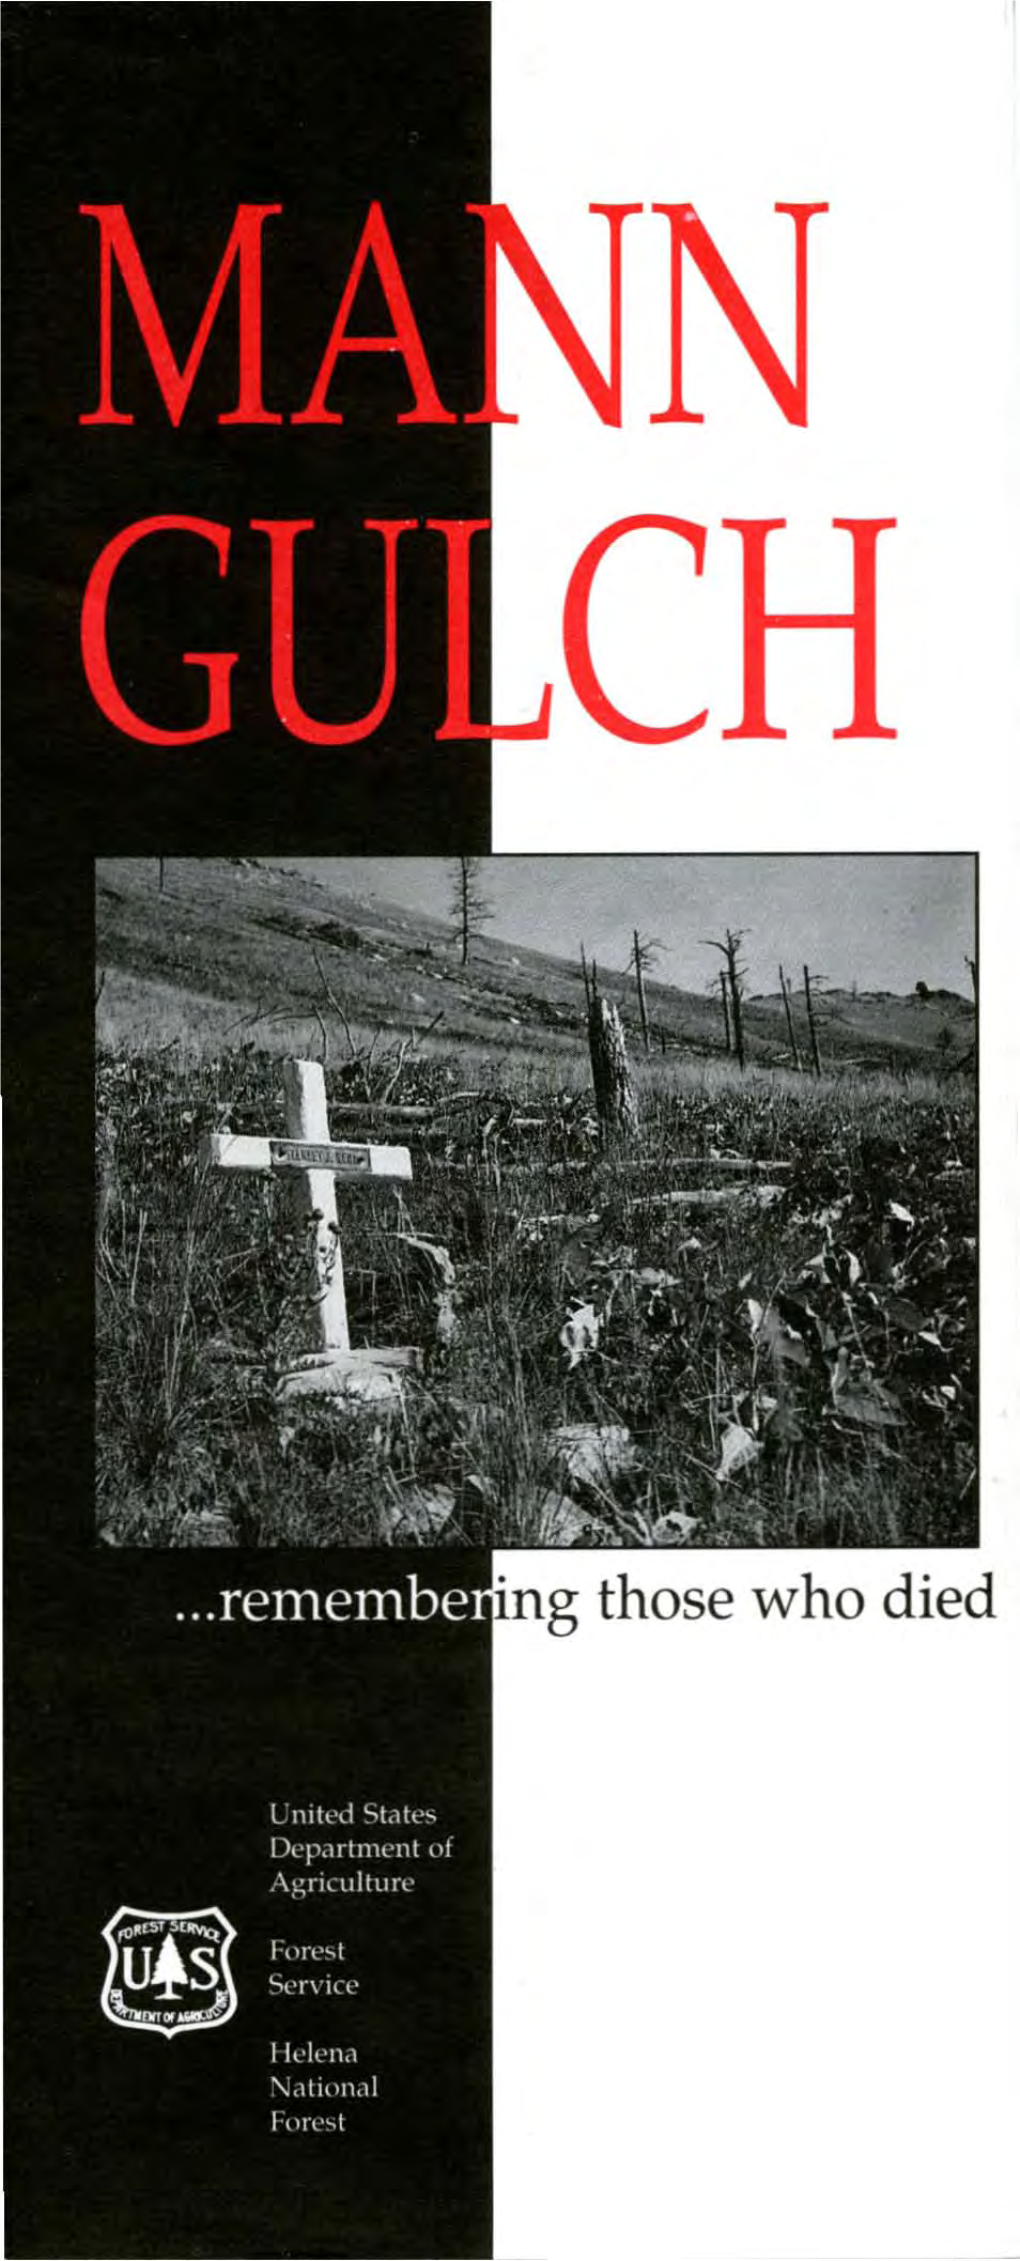 Brochure for Visitors to Mann Gulch, USFS 1997